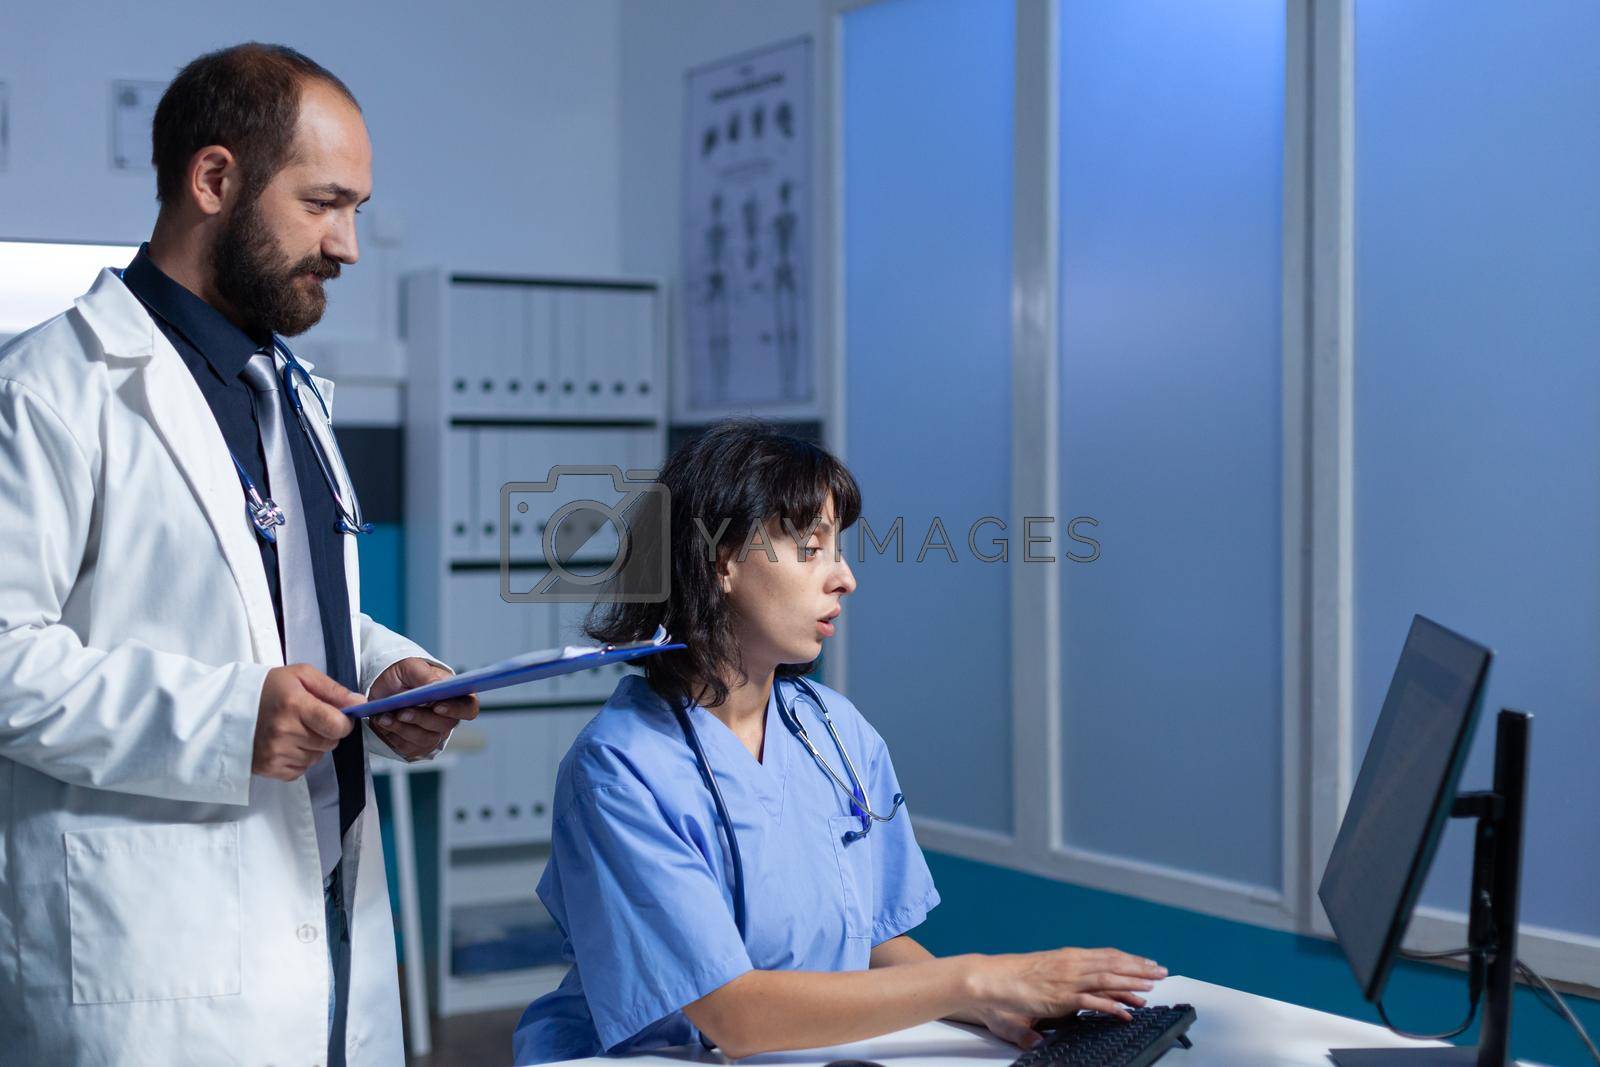 Medical team of workers looking at monitor for healthcare information and examination. Doctor holding checkup files while nurse working with computer on desk. Man and woman at job